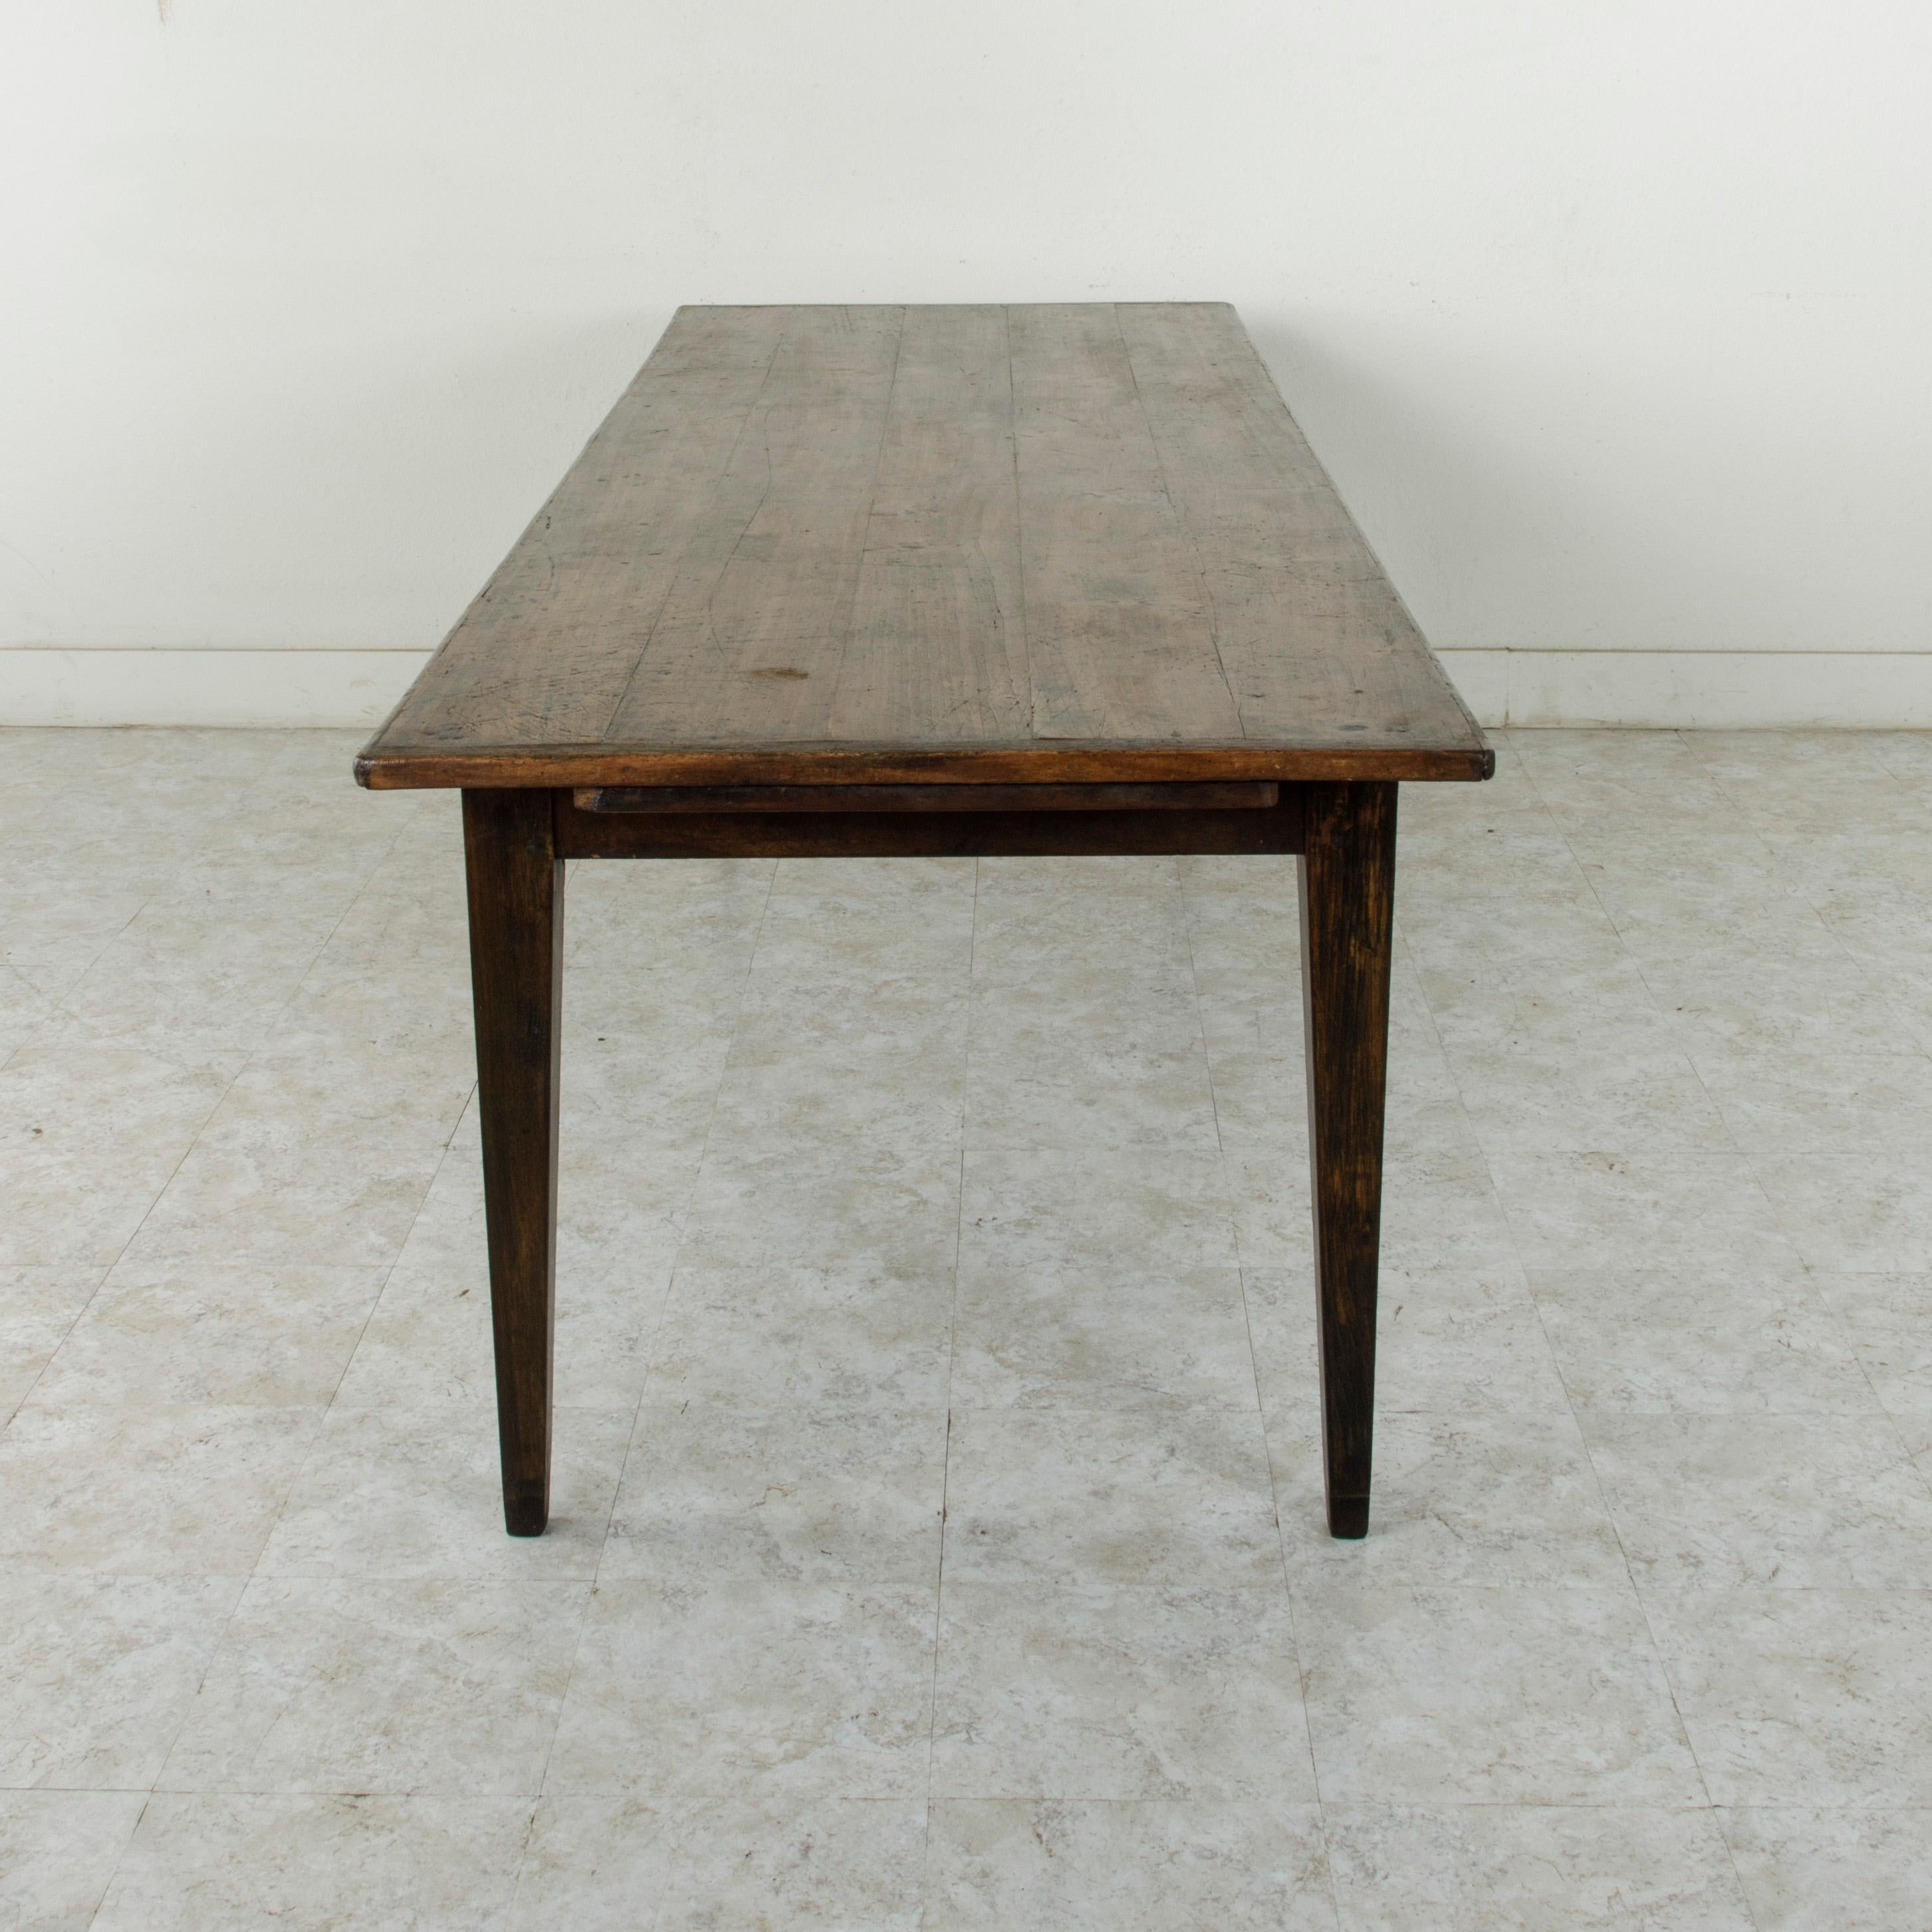 Early 20th Century French Artisan Made Oak Farm Table or Dining Table with Cutting Board